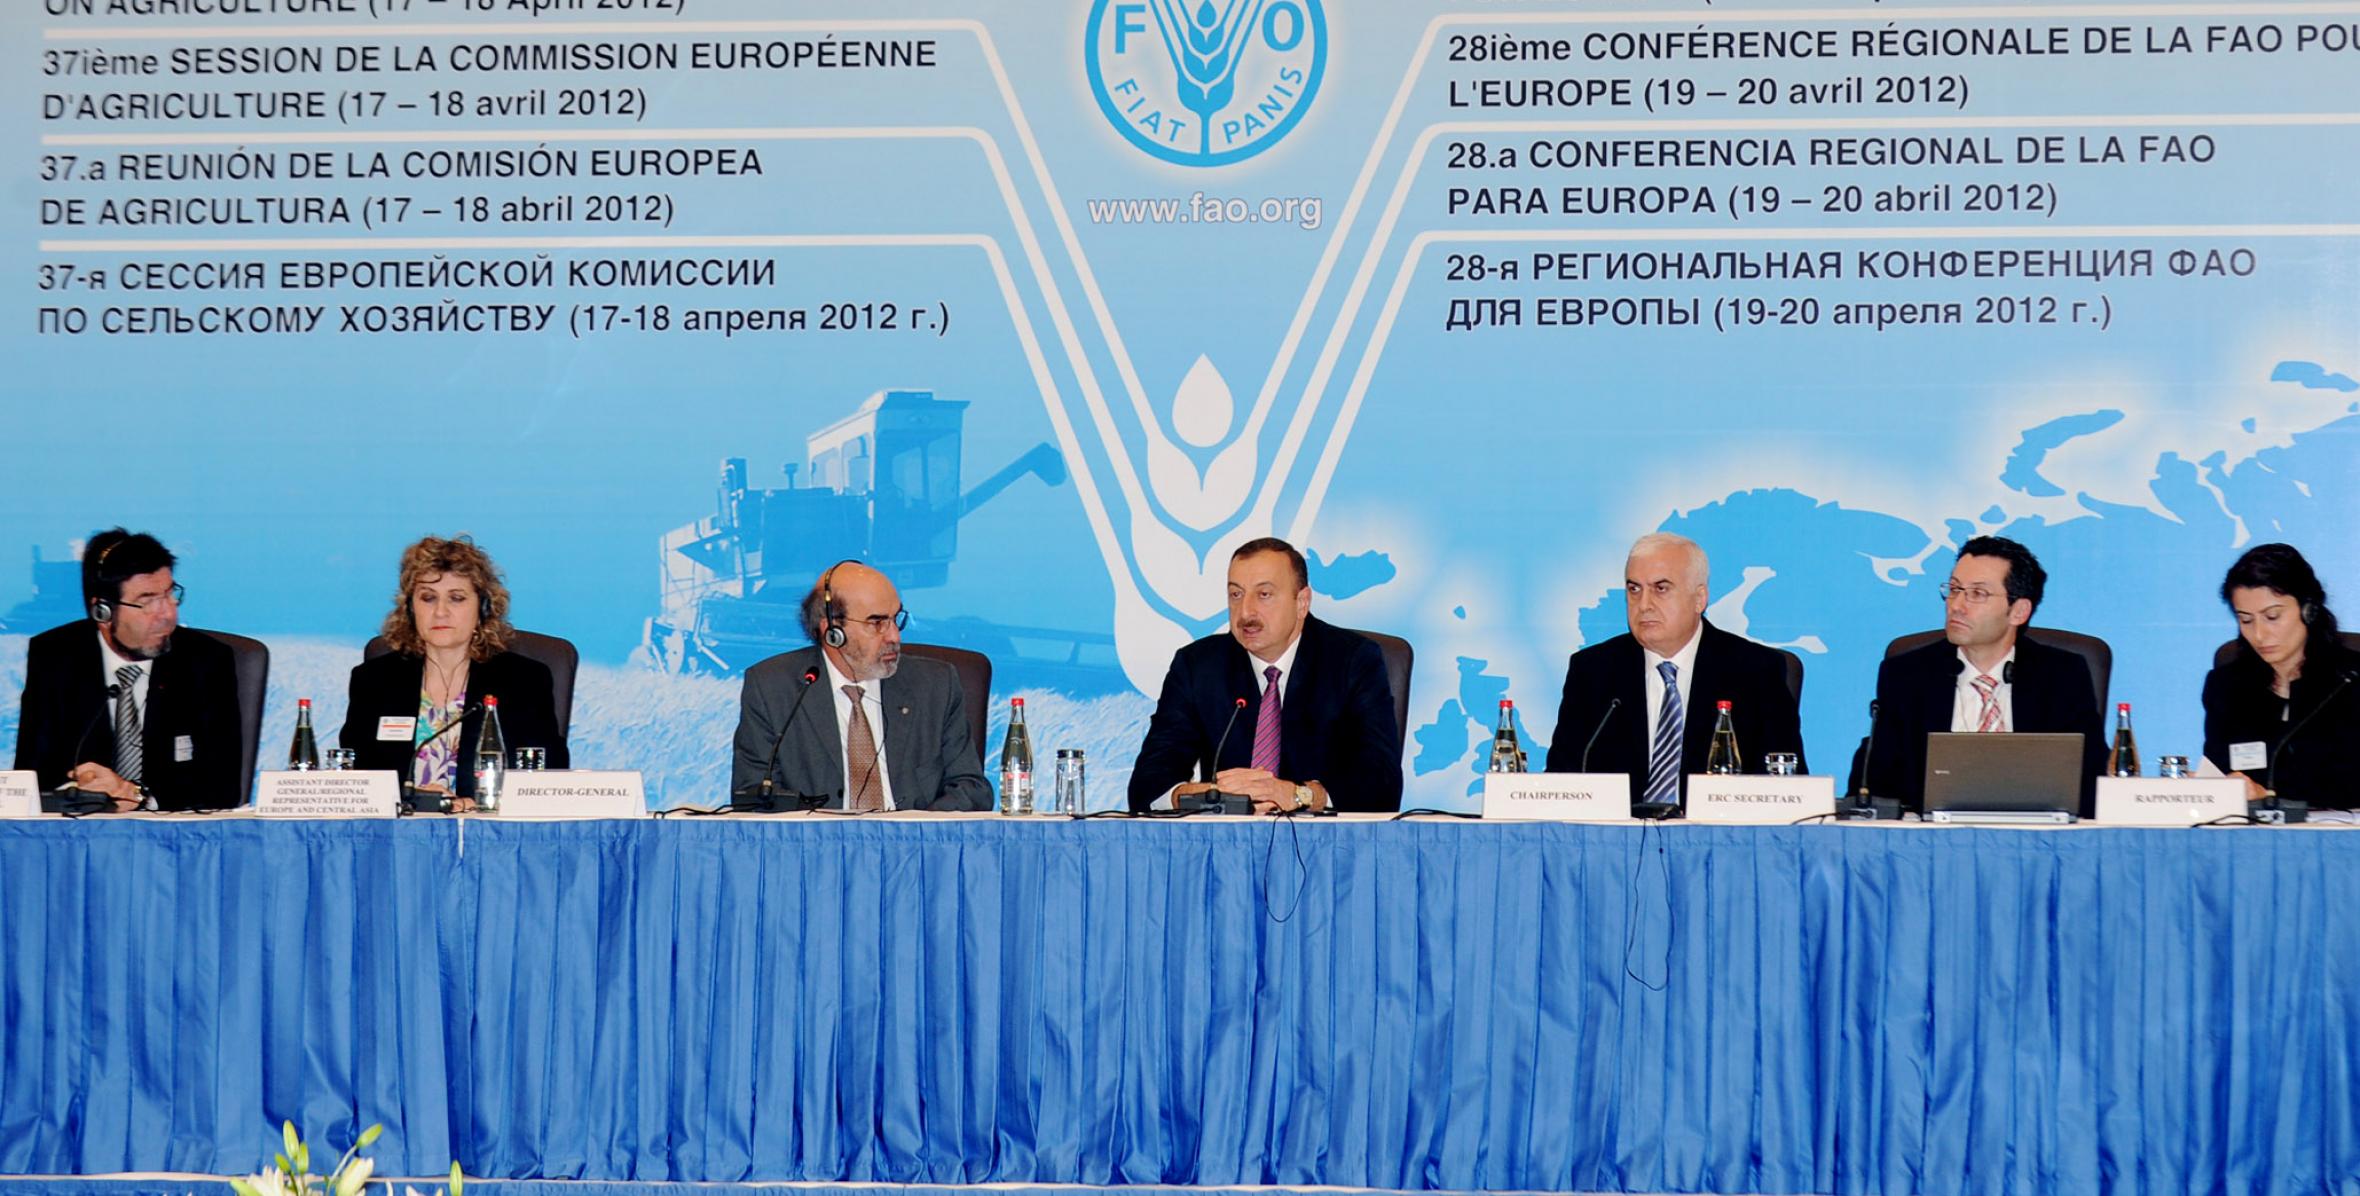 Ilham Aliyev attended the opening ceremony of the 28th regional conference for Europe of the UN Food and Agriculture Organization